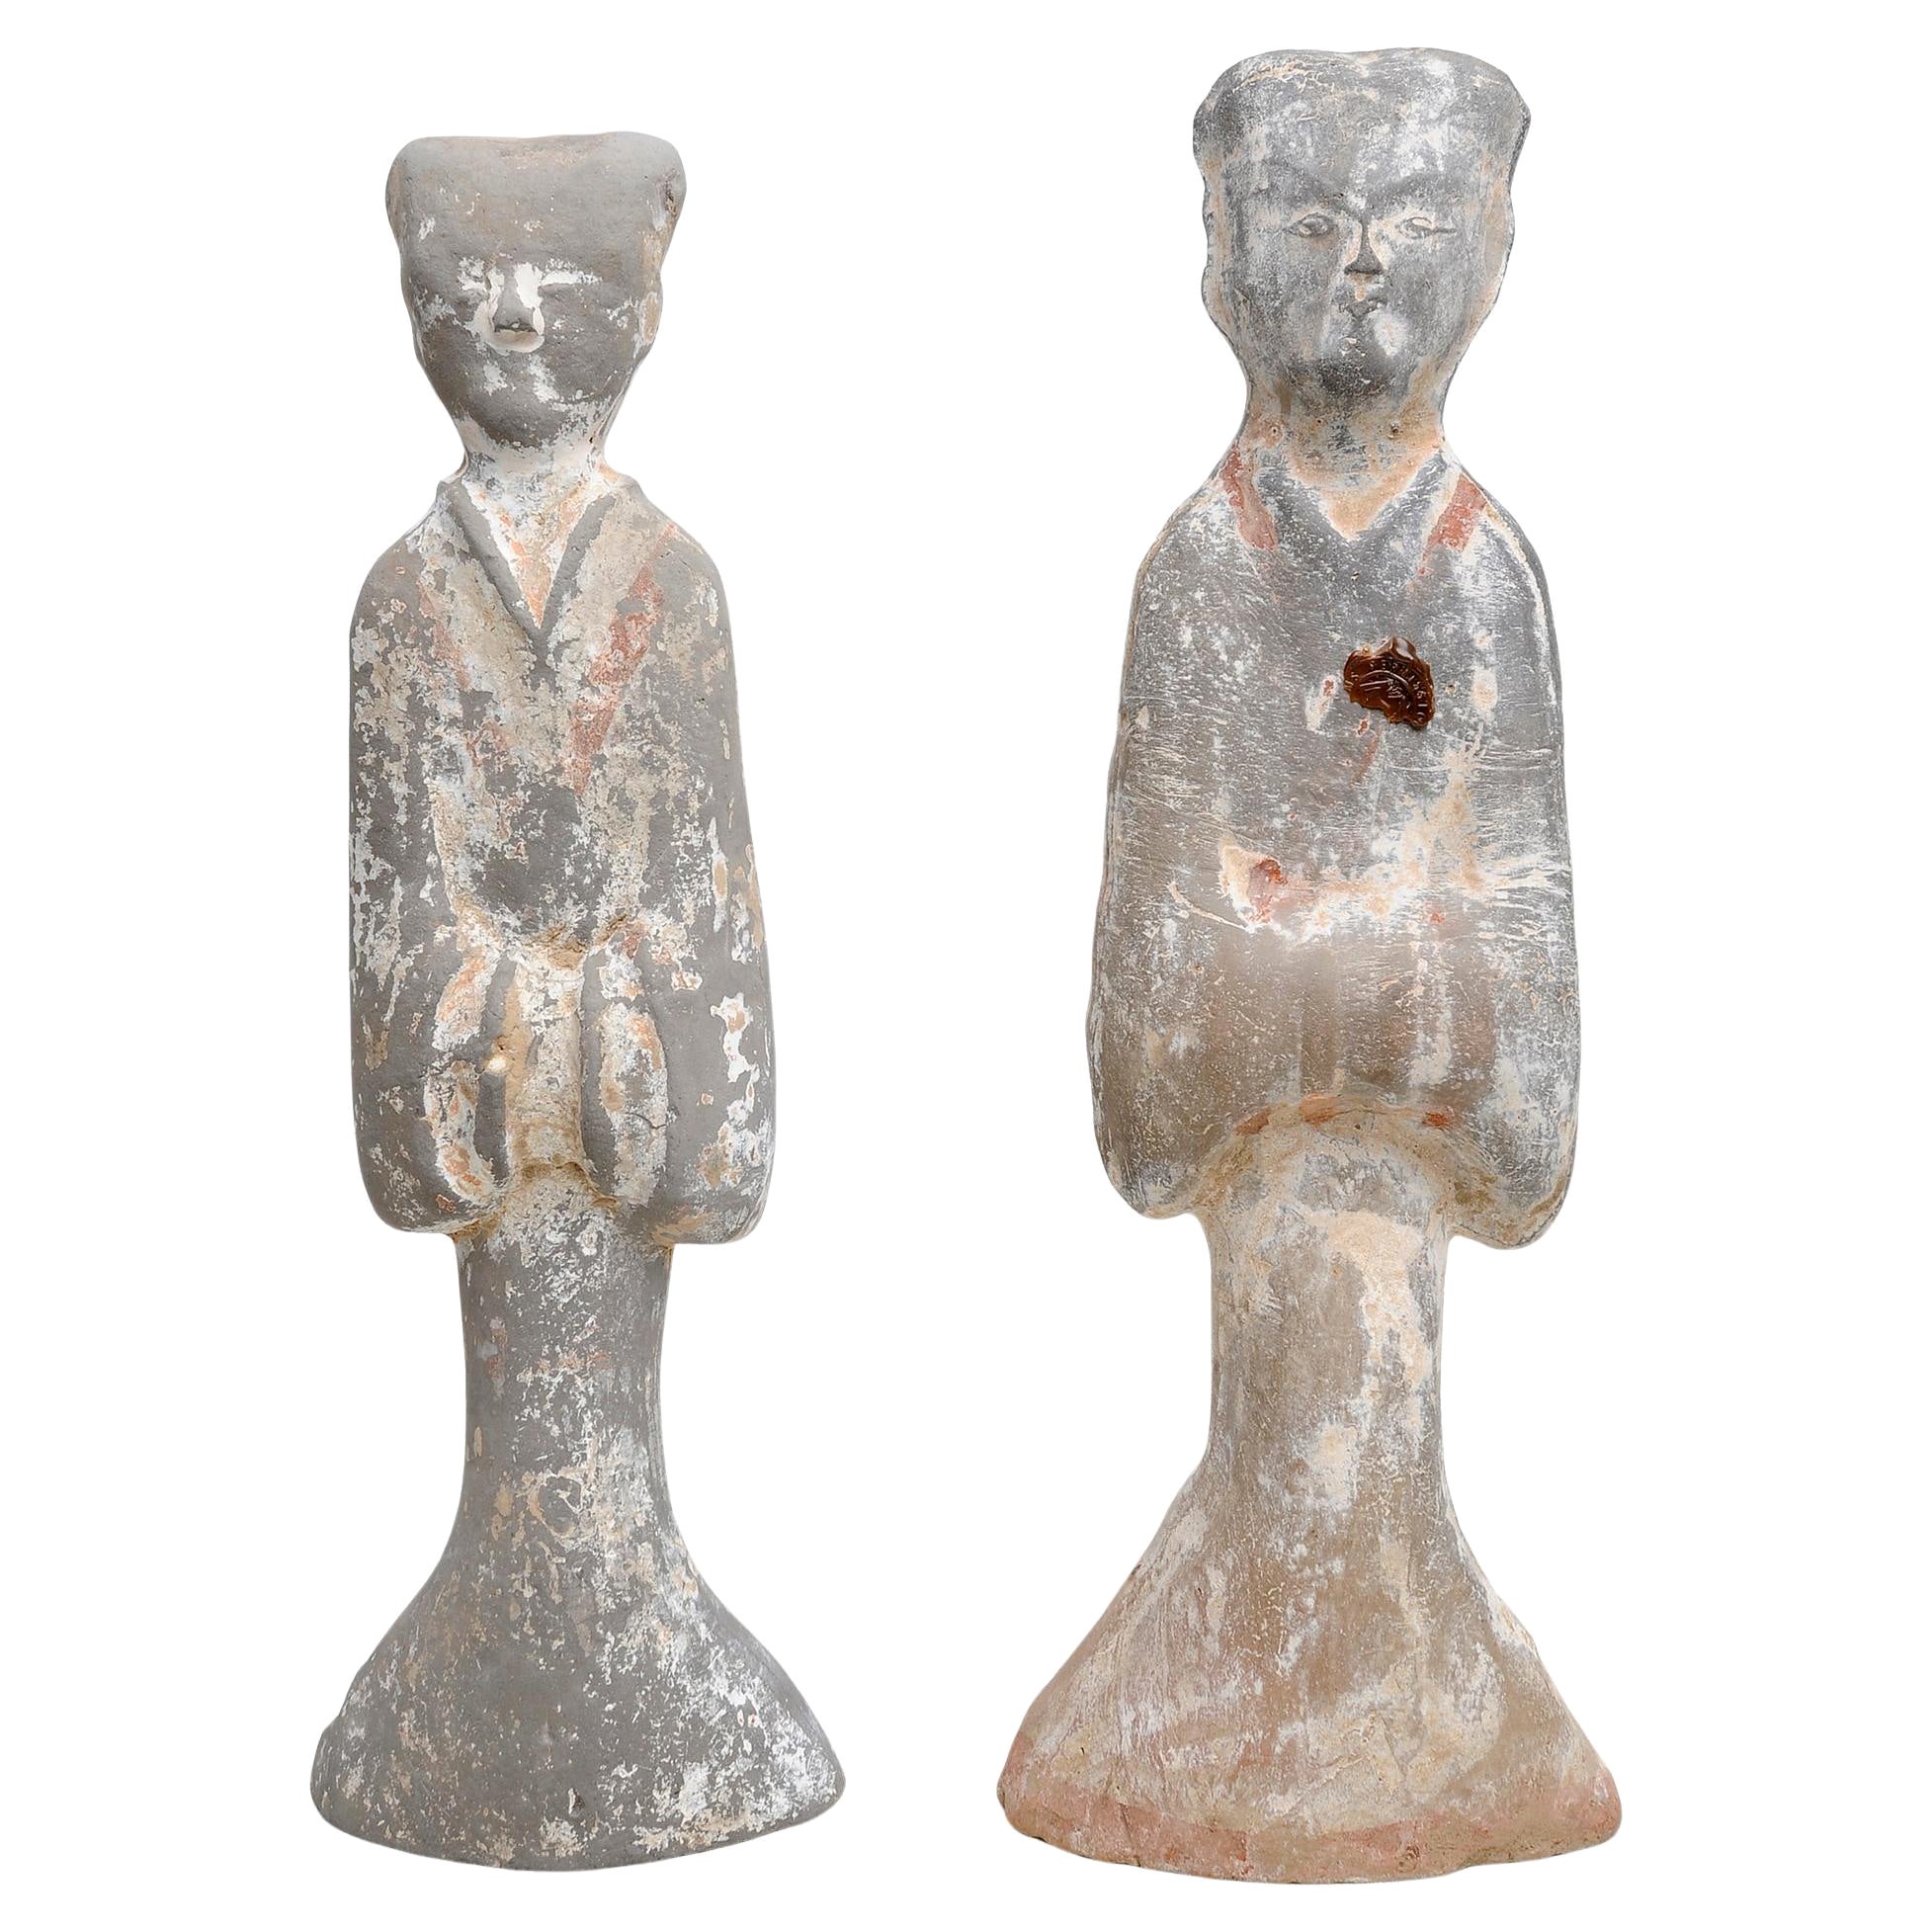 Antique Terracotta Chinese Figures Statues For Sale